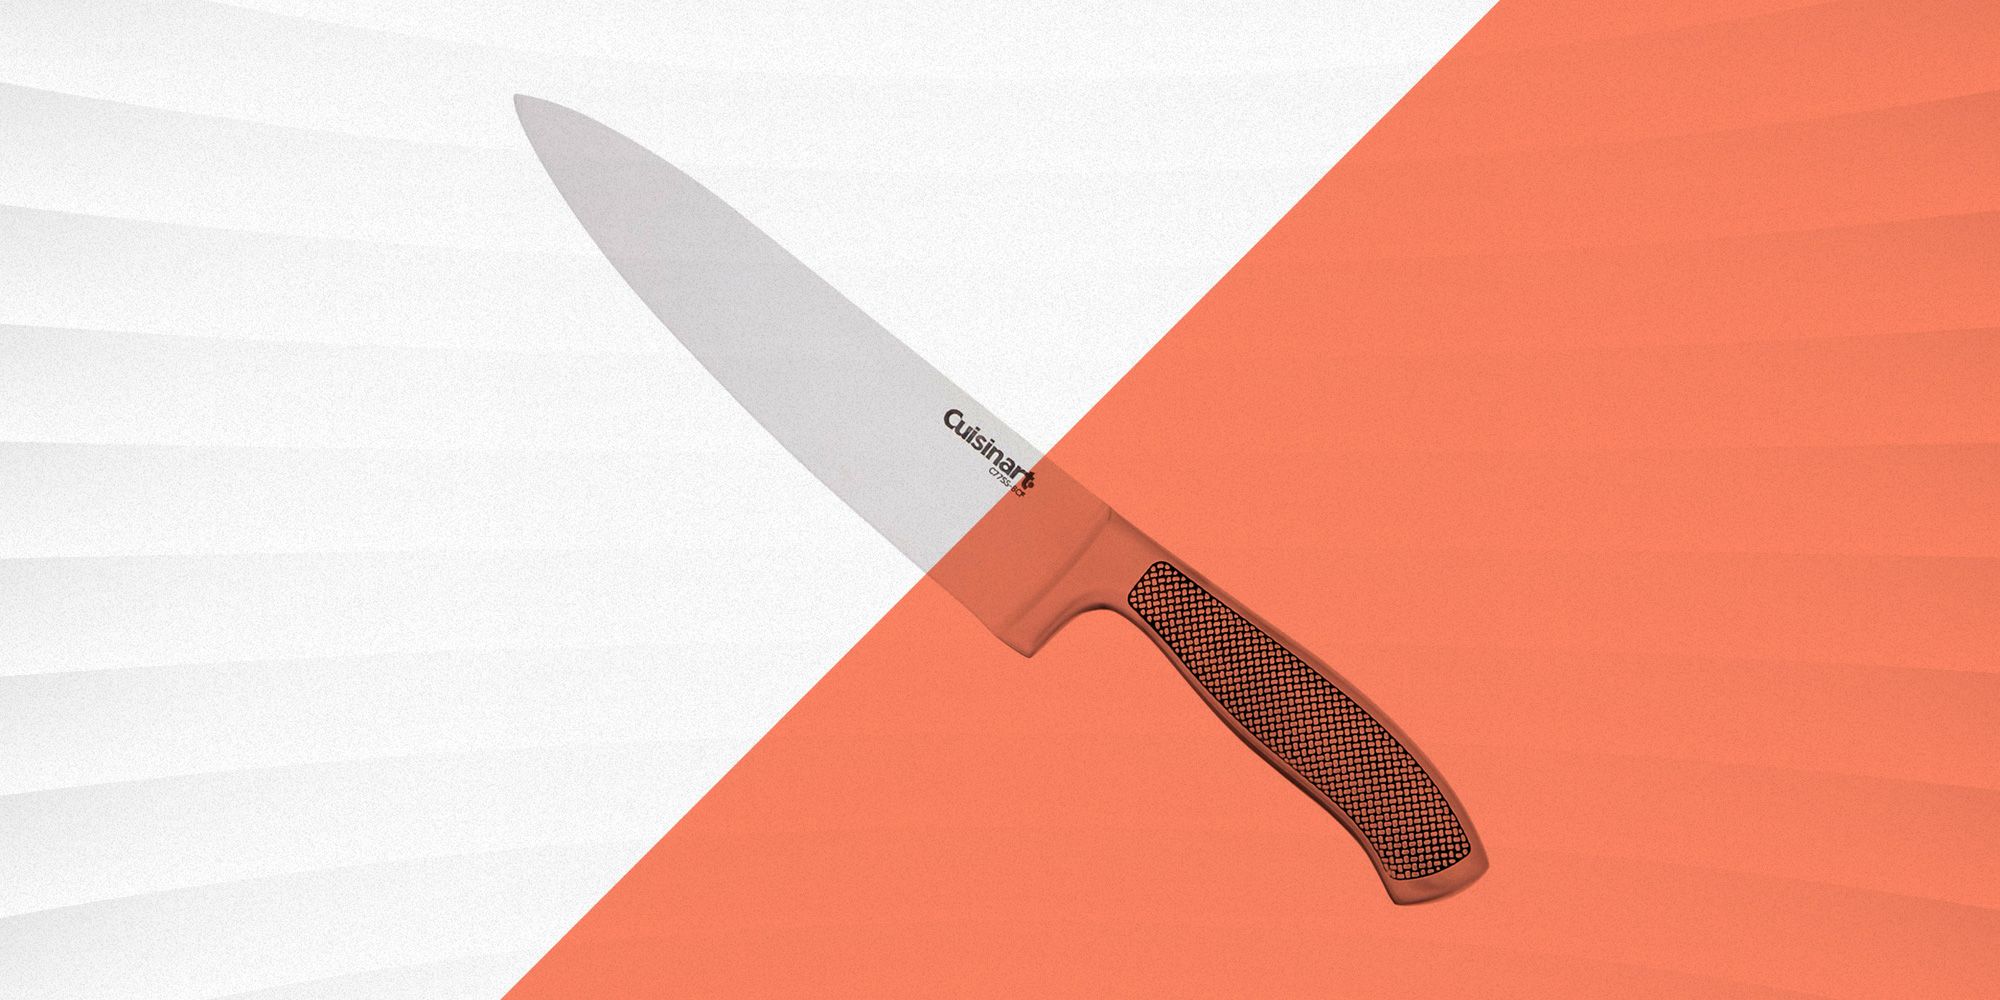 10 Best Knives for Home Chefs in 2022